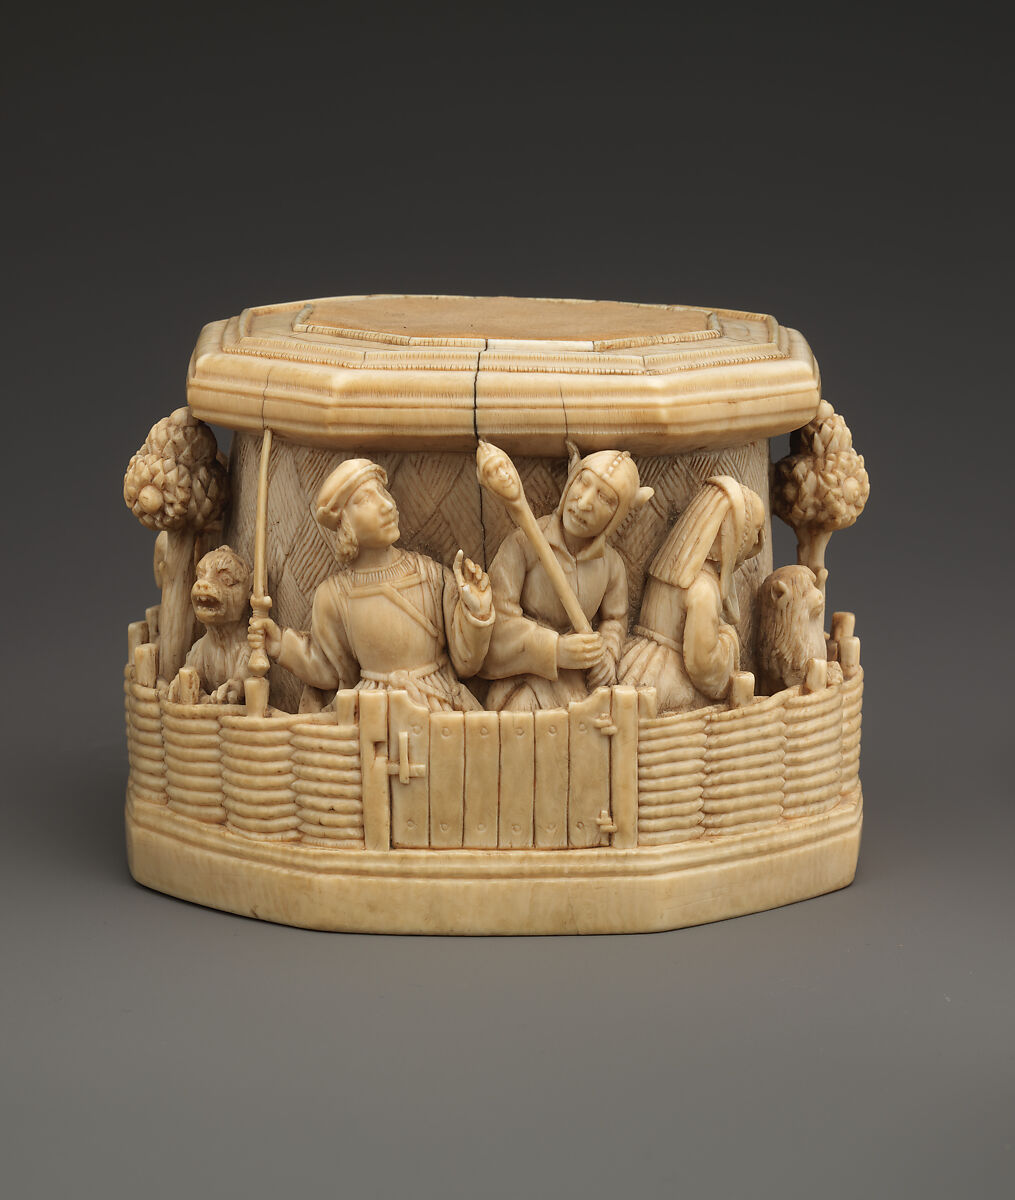 Base for a Statuette, Ivory, North French or South Netherlandish